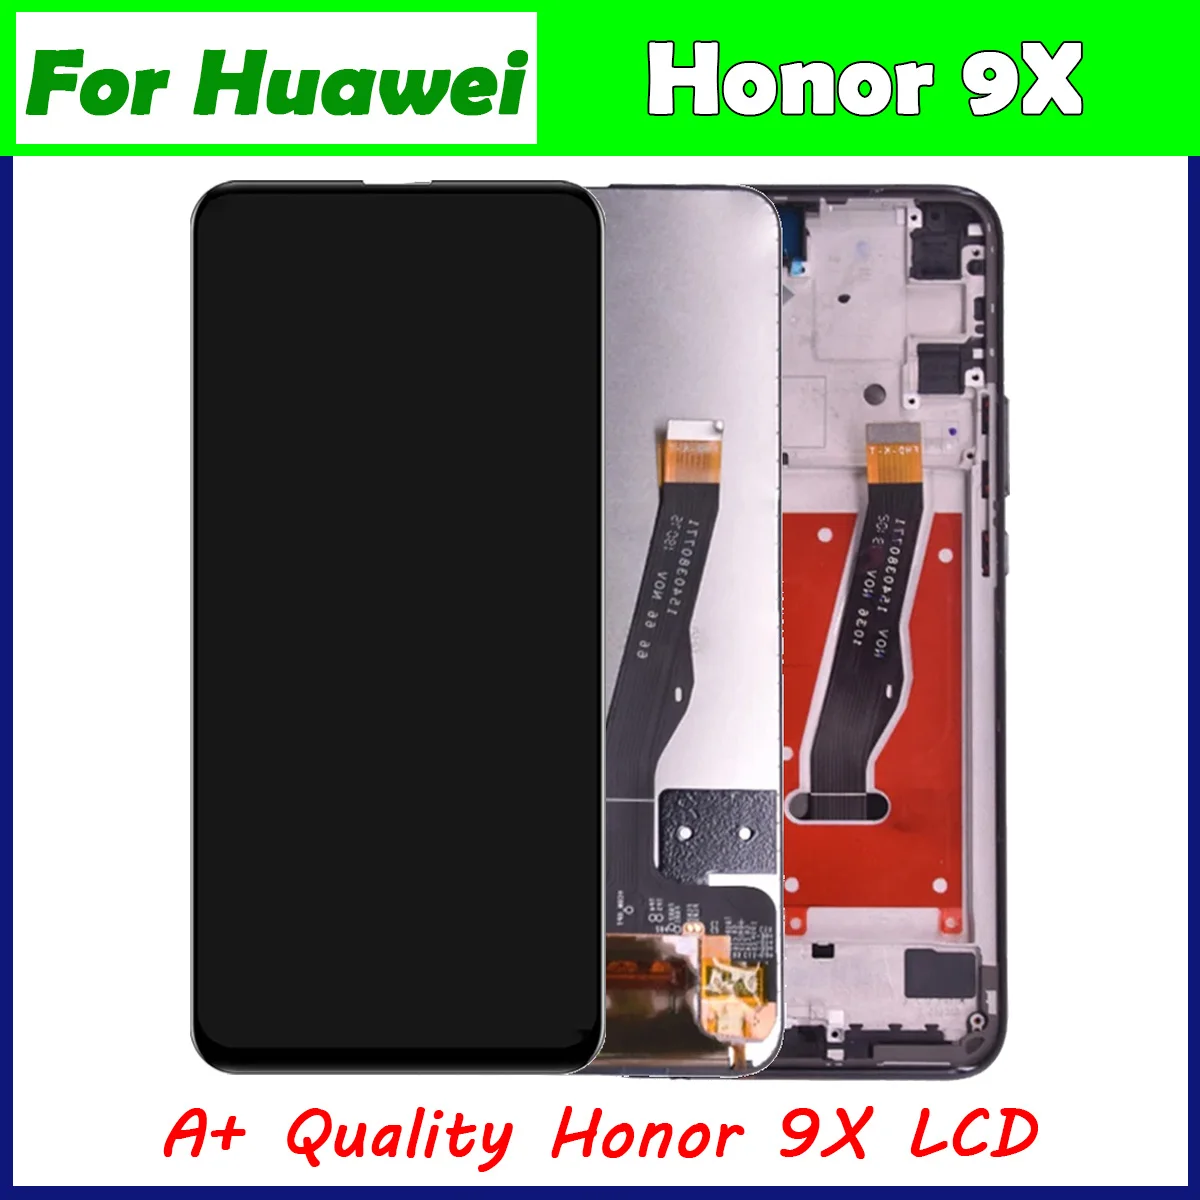 

100% Test For honor 9X LCD For Huawei Honor 9X Premium Global STK-LX1 LCD Display Touch Screen Digitizer Assembly+Frame